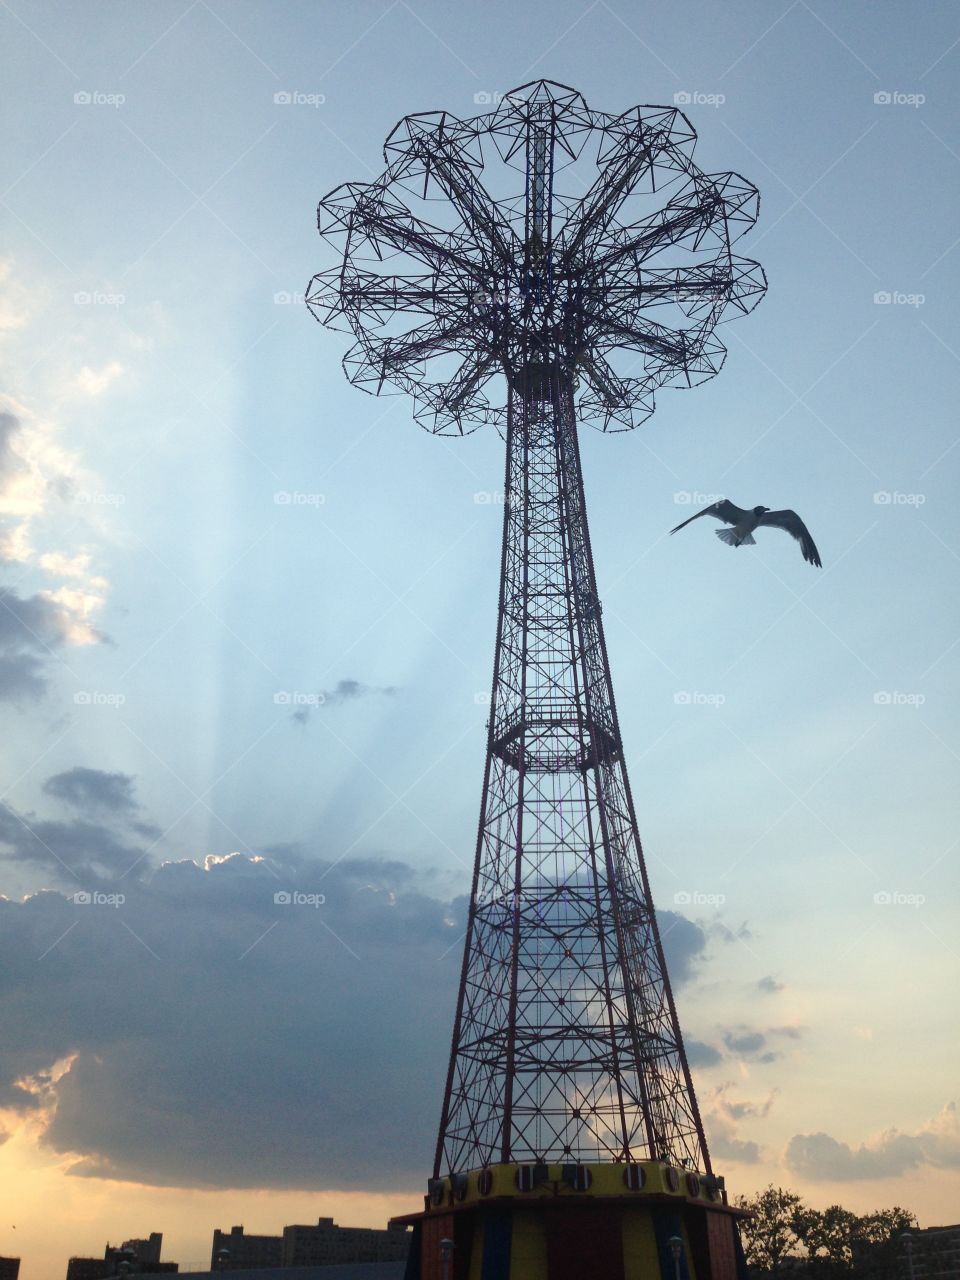 For Daddy. Parachute Jump, Coney Island